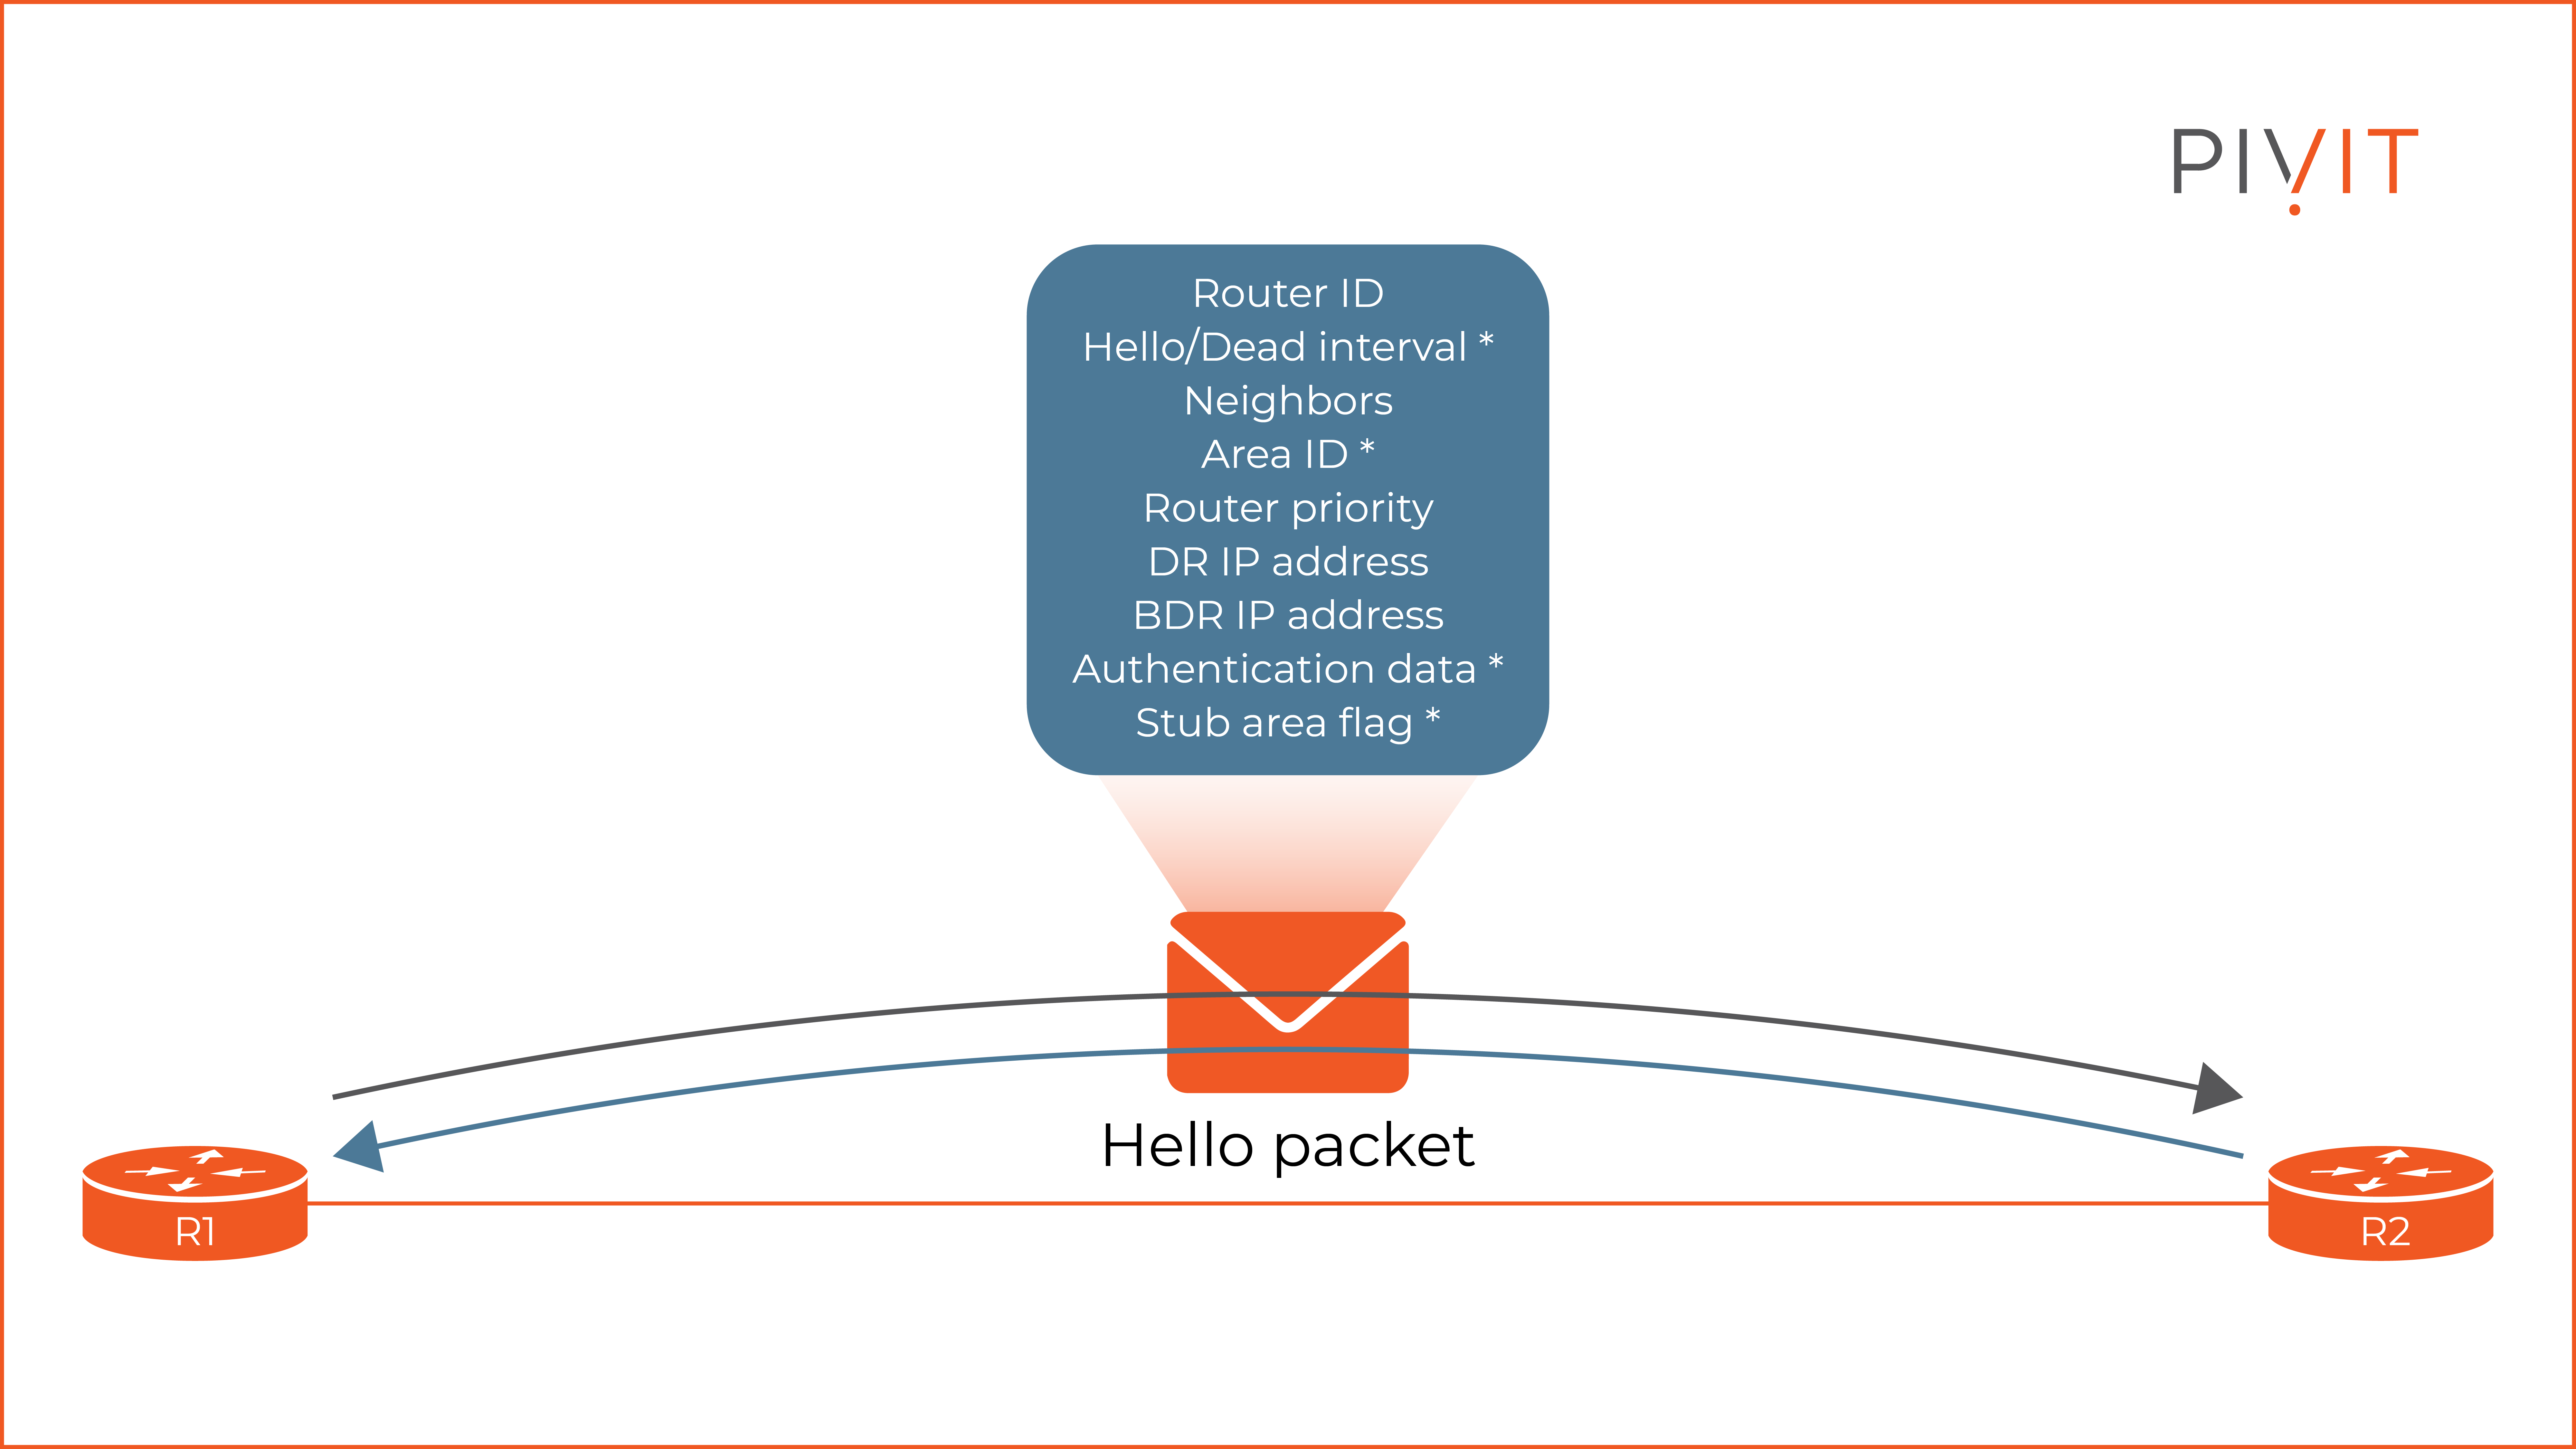 Hello packet information transfer between router 1 and 2